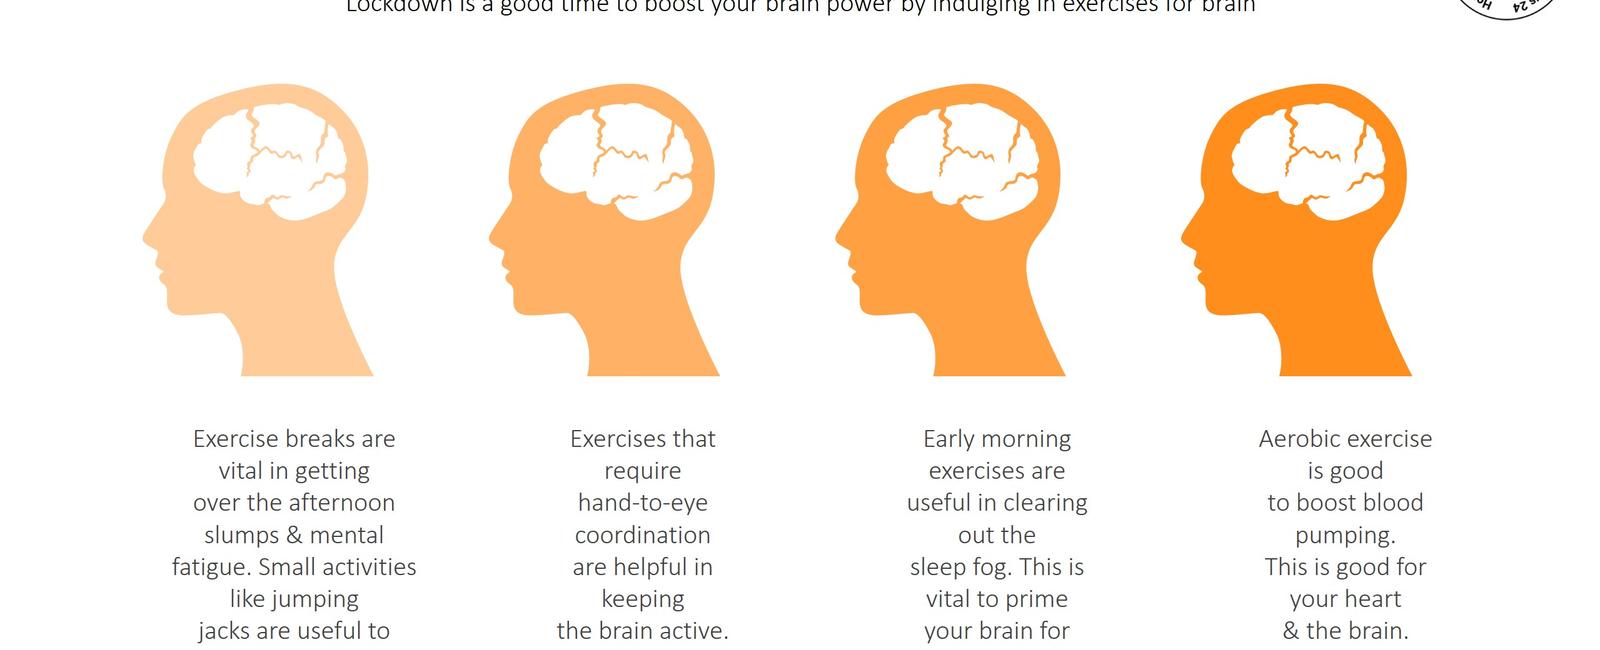 Exercise increases your intelligence